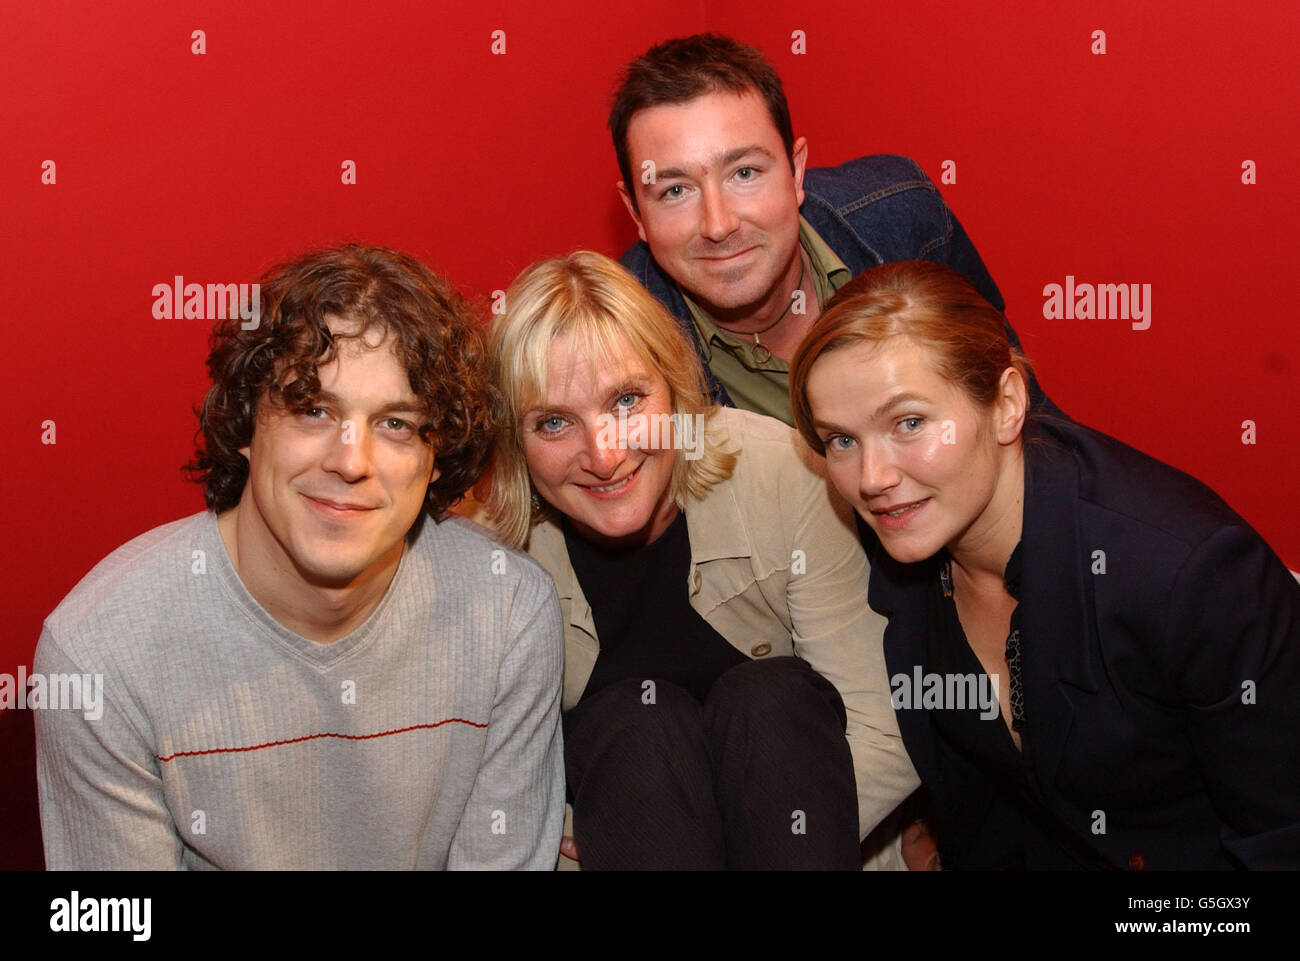 Members of the cast (left - right) Alan Davies (Bob), Lesley Sharp (Rose), Daniel Ryan (Andy) and Jessica Stevenson (Holly) after a preview screening of a new televsion programme, 'Bob & Rose' from Queer as Folk writer Russell T Davies. Stock Photo